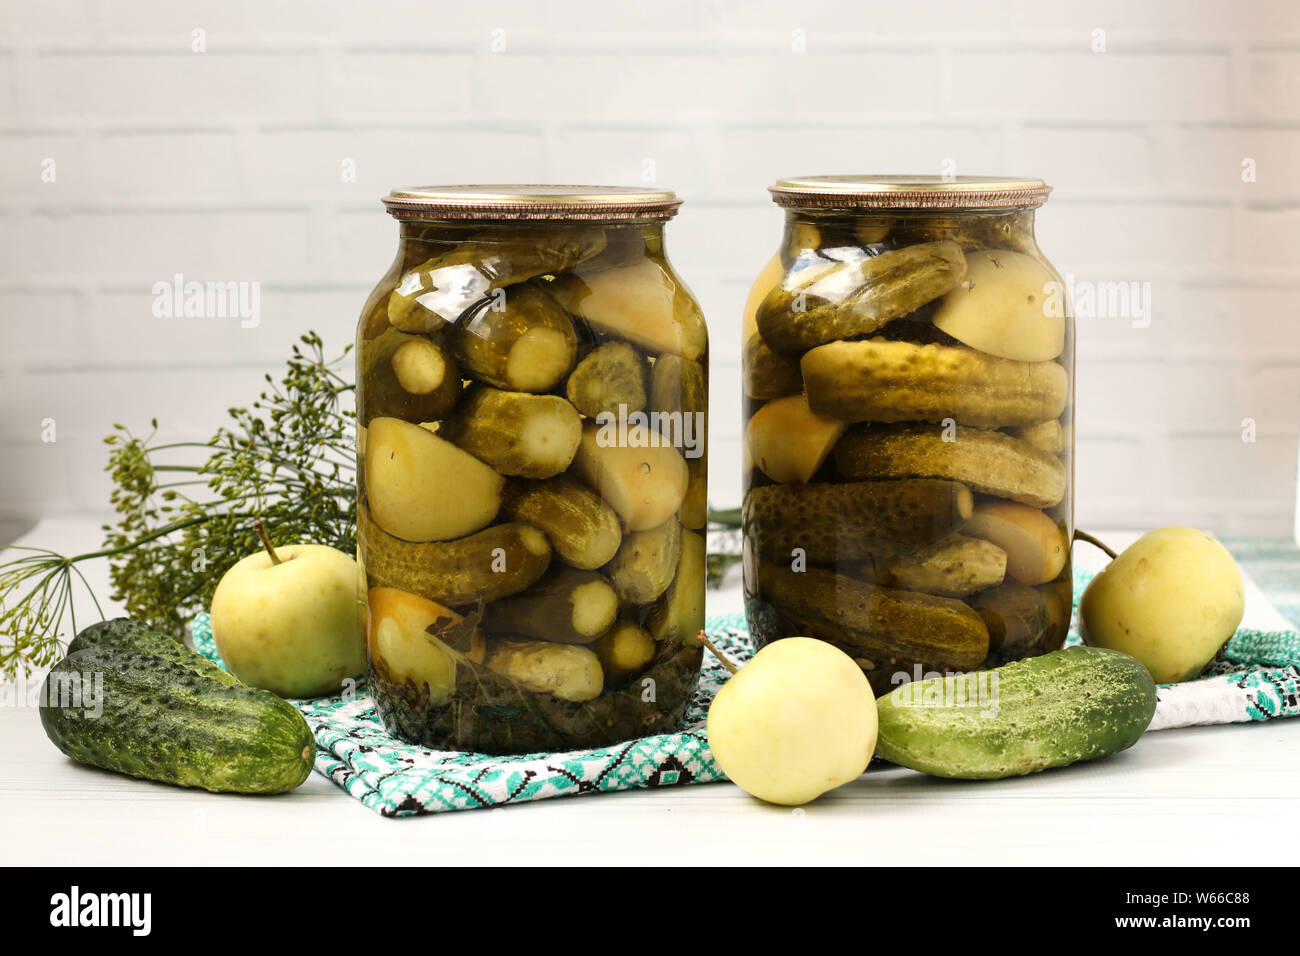 Download Yellow Cucumbers High Resolution Stock Photography And Images Alamy Yellowimages Mockups